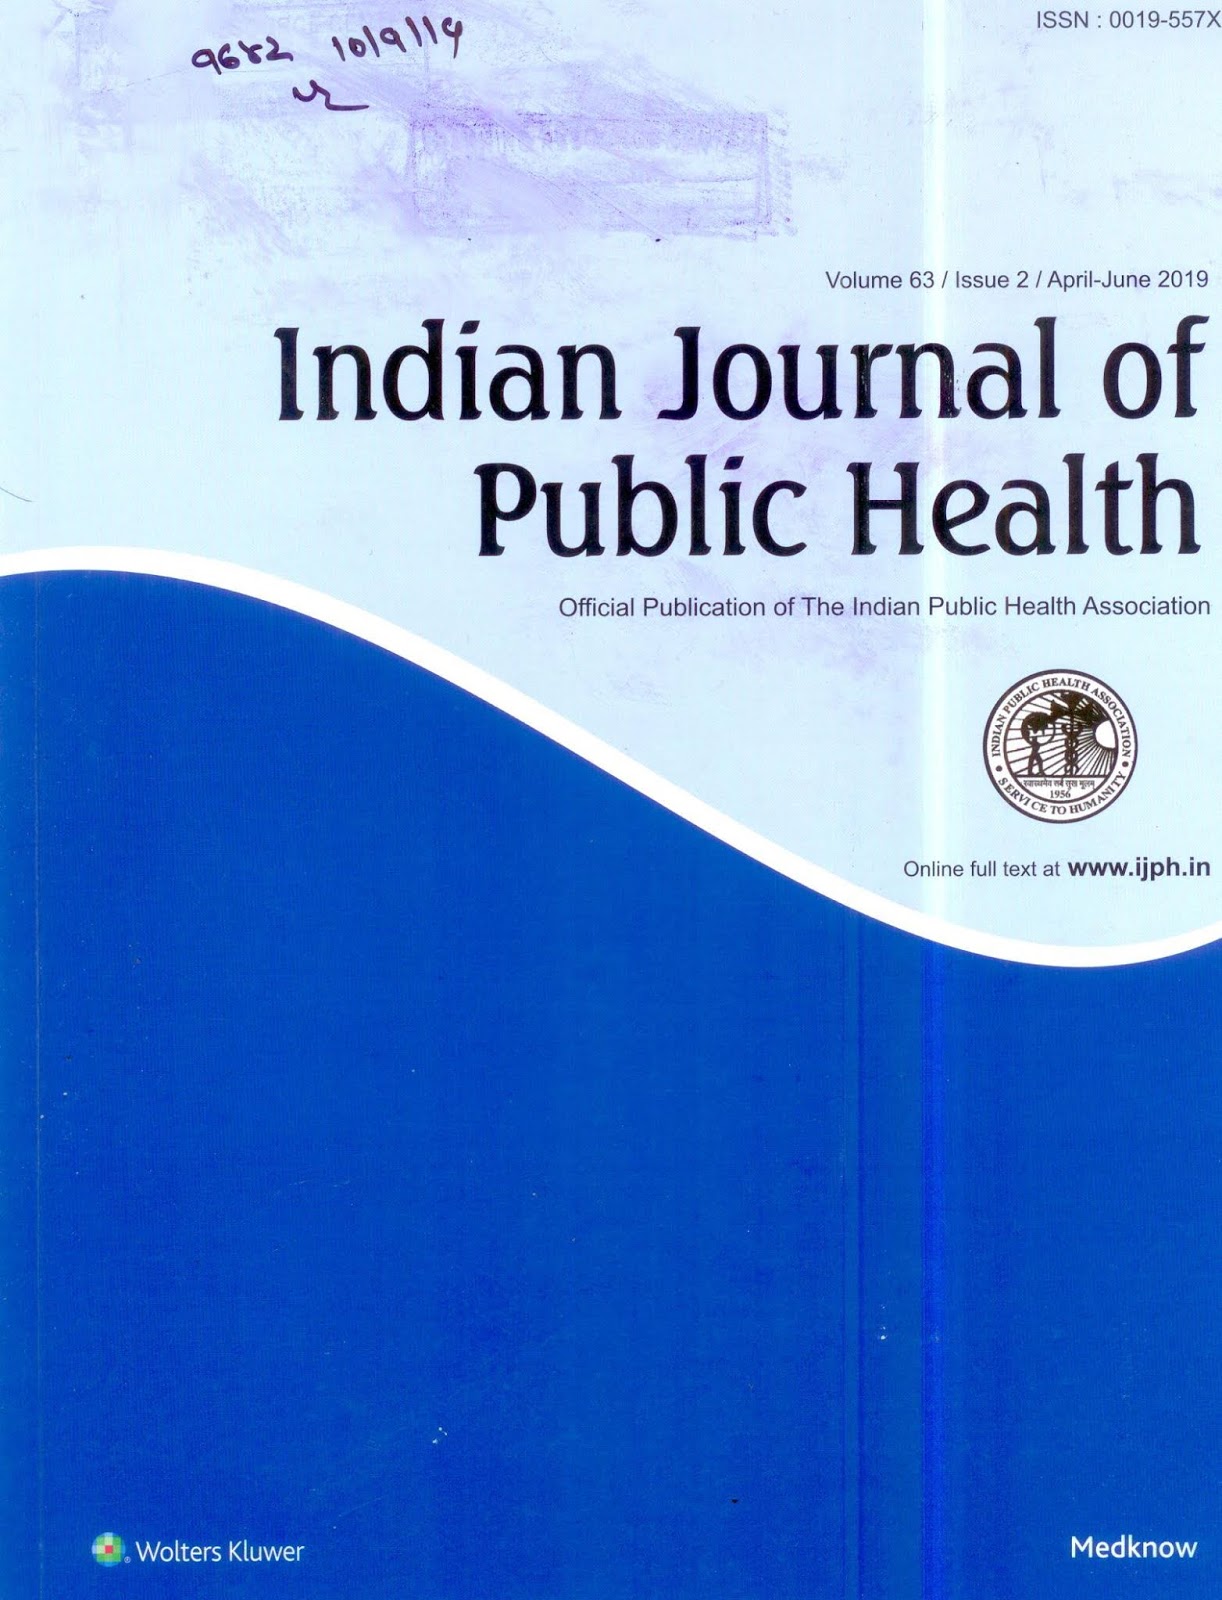 http://www.ijph.in/showBackIssue.asp?issn=0019-557X;year=2019;volume=63;issue=2;month=April-June